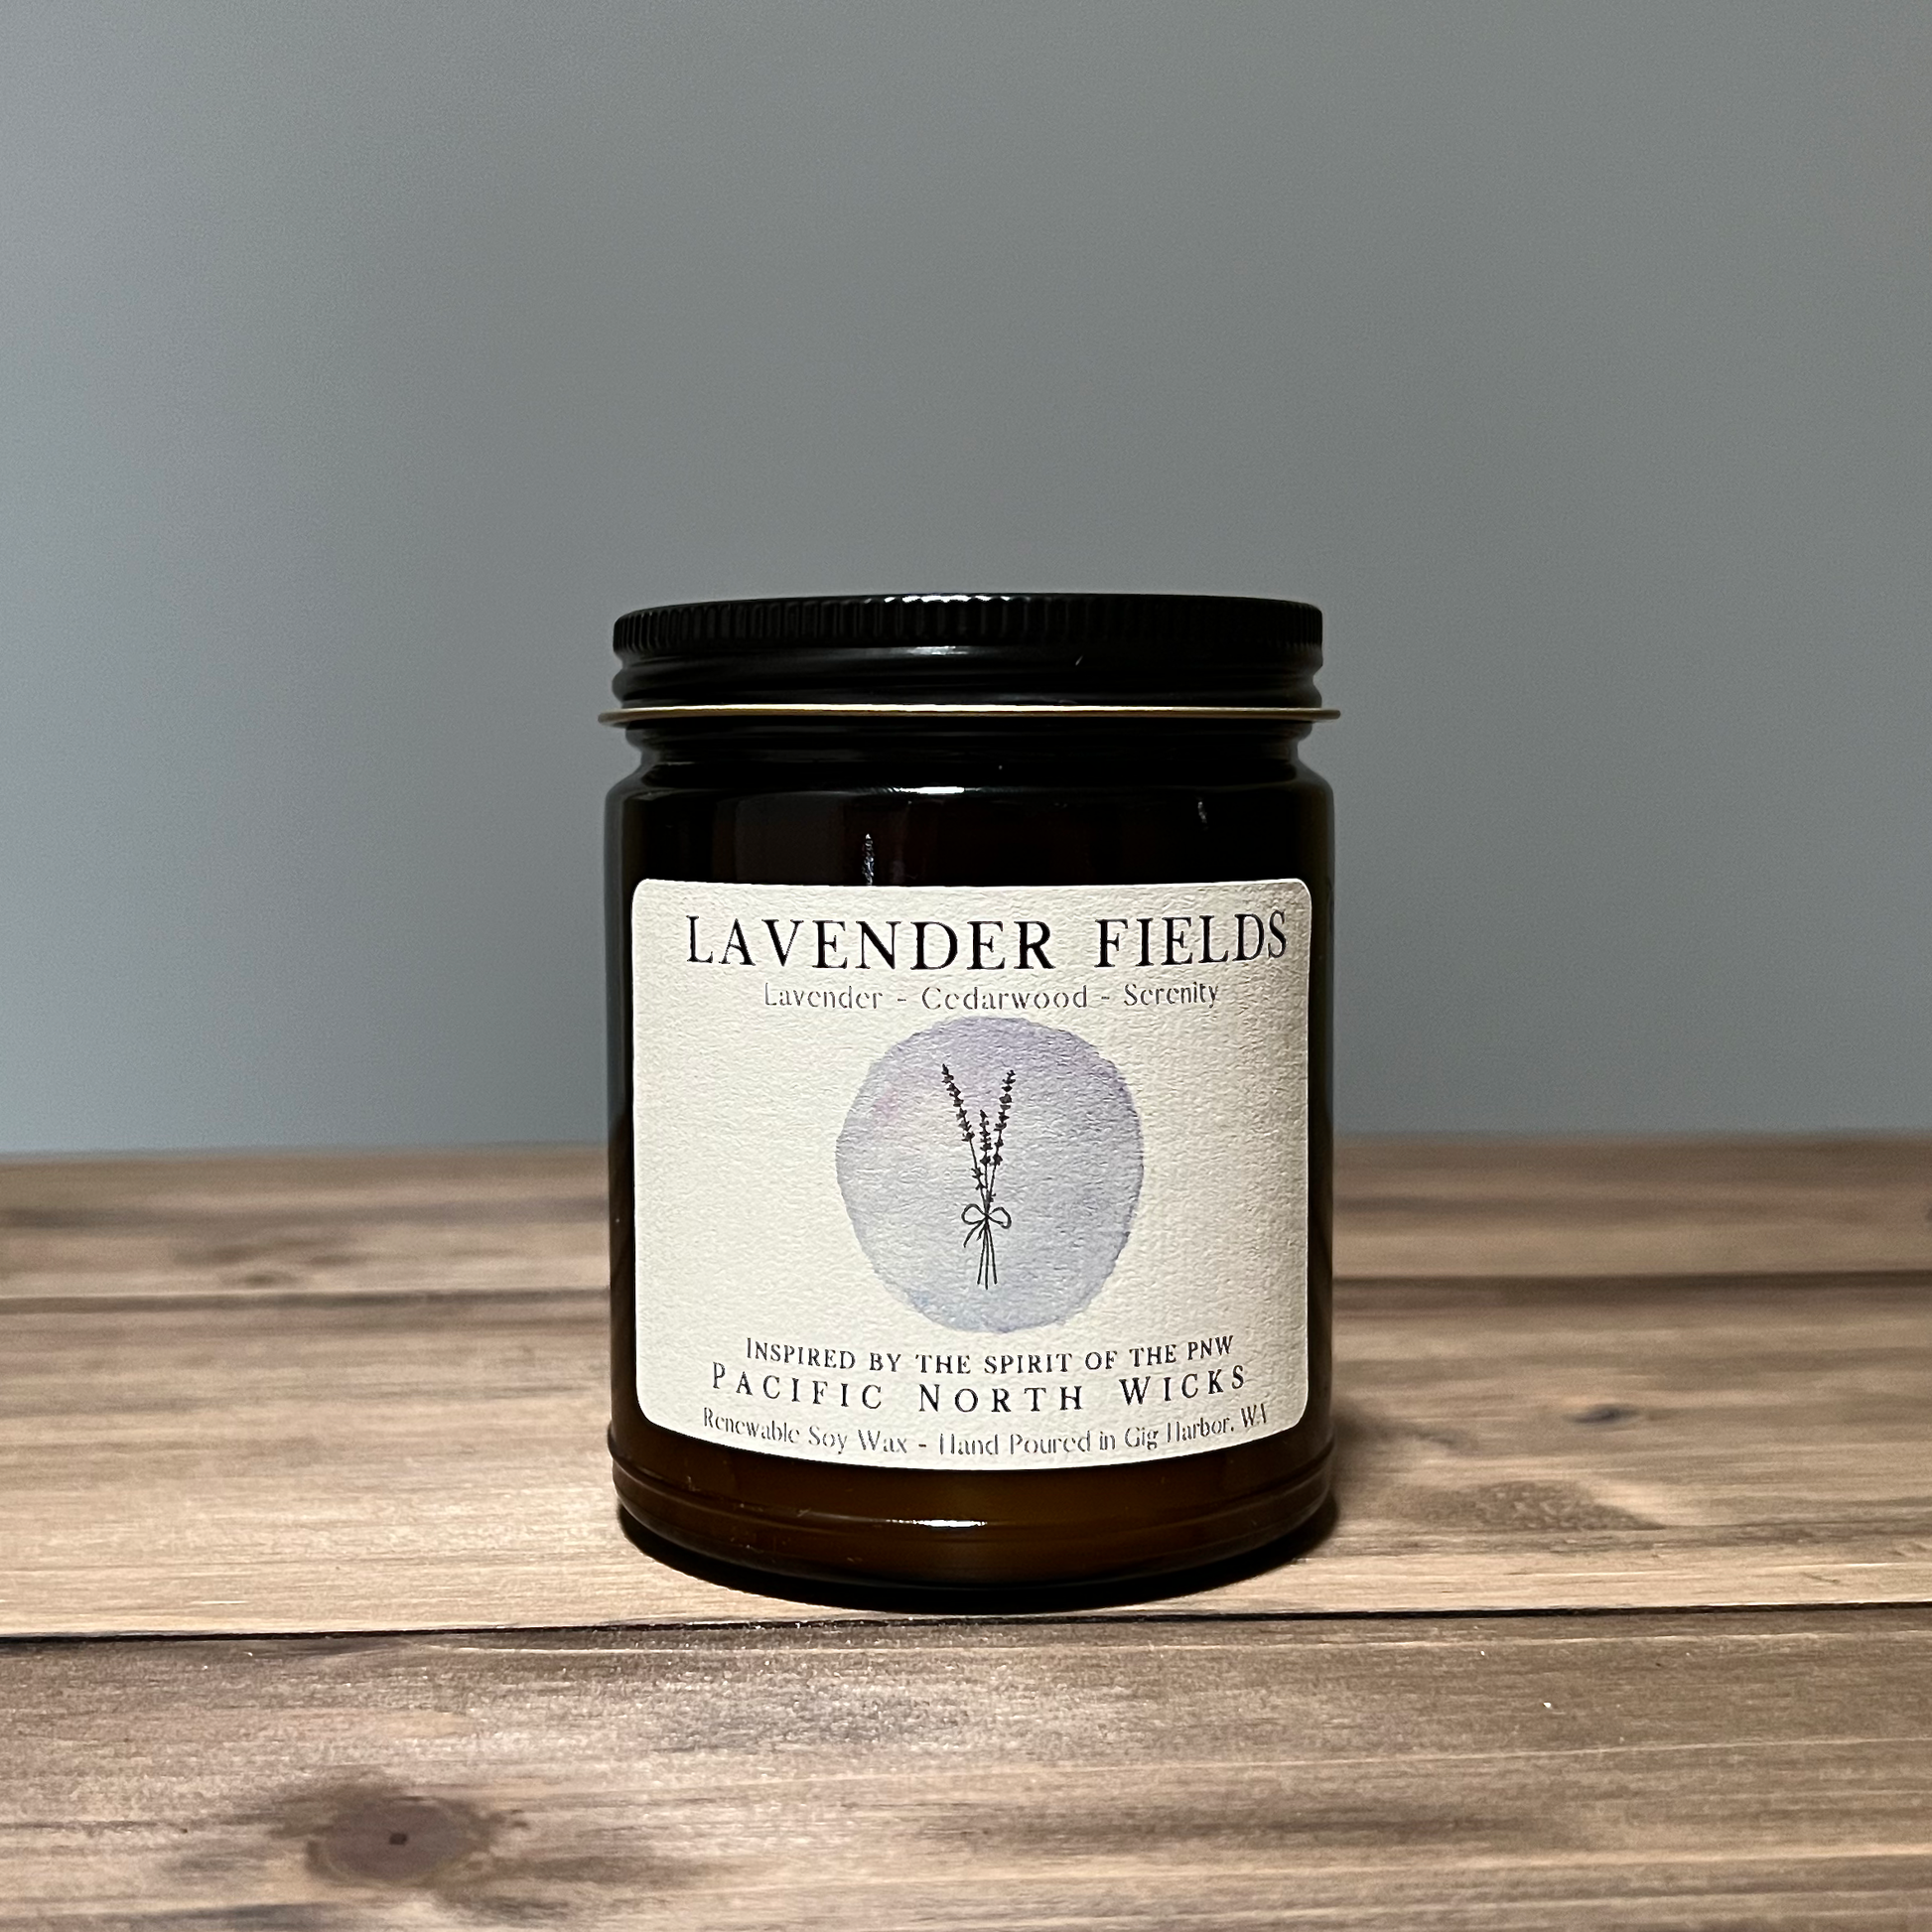 Lavender Fields Candle - Amber Jar with Black Lid